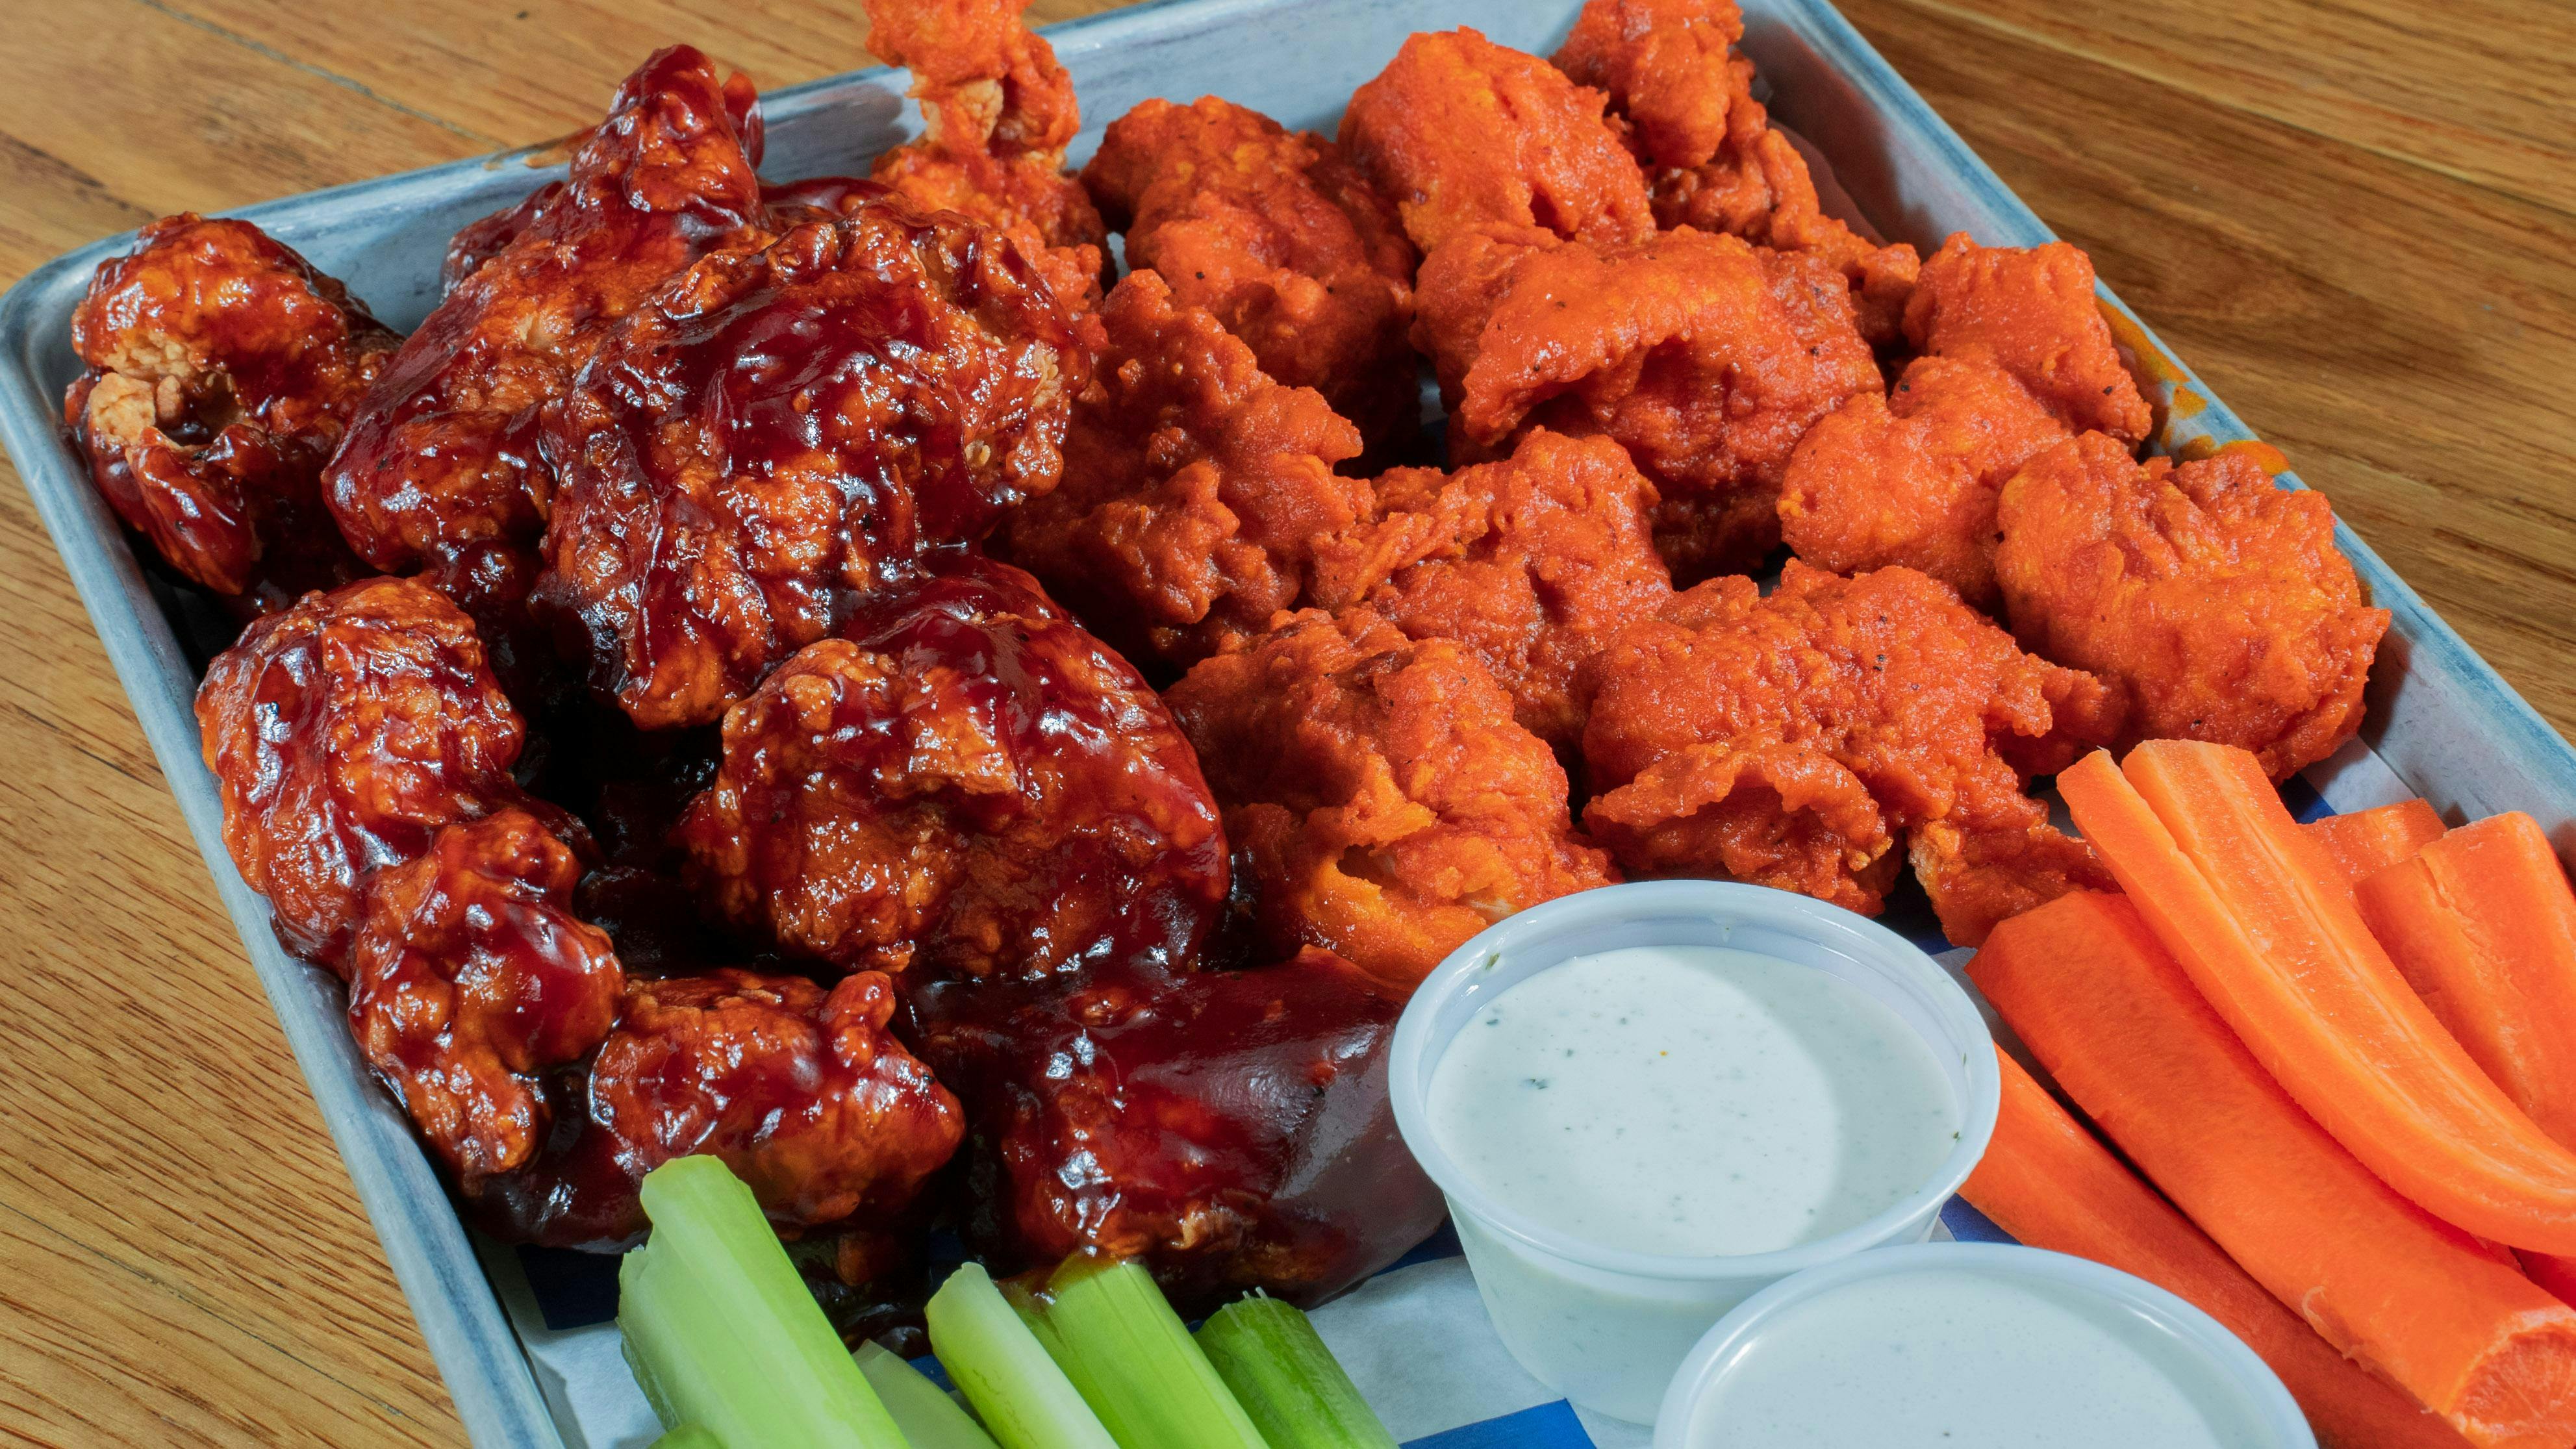 10 Boneless Wings from Austin Tailgate Party - Research Blvd in Austin, TX